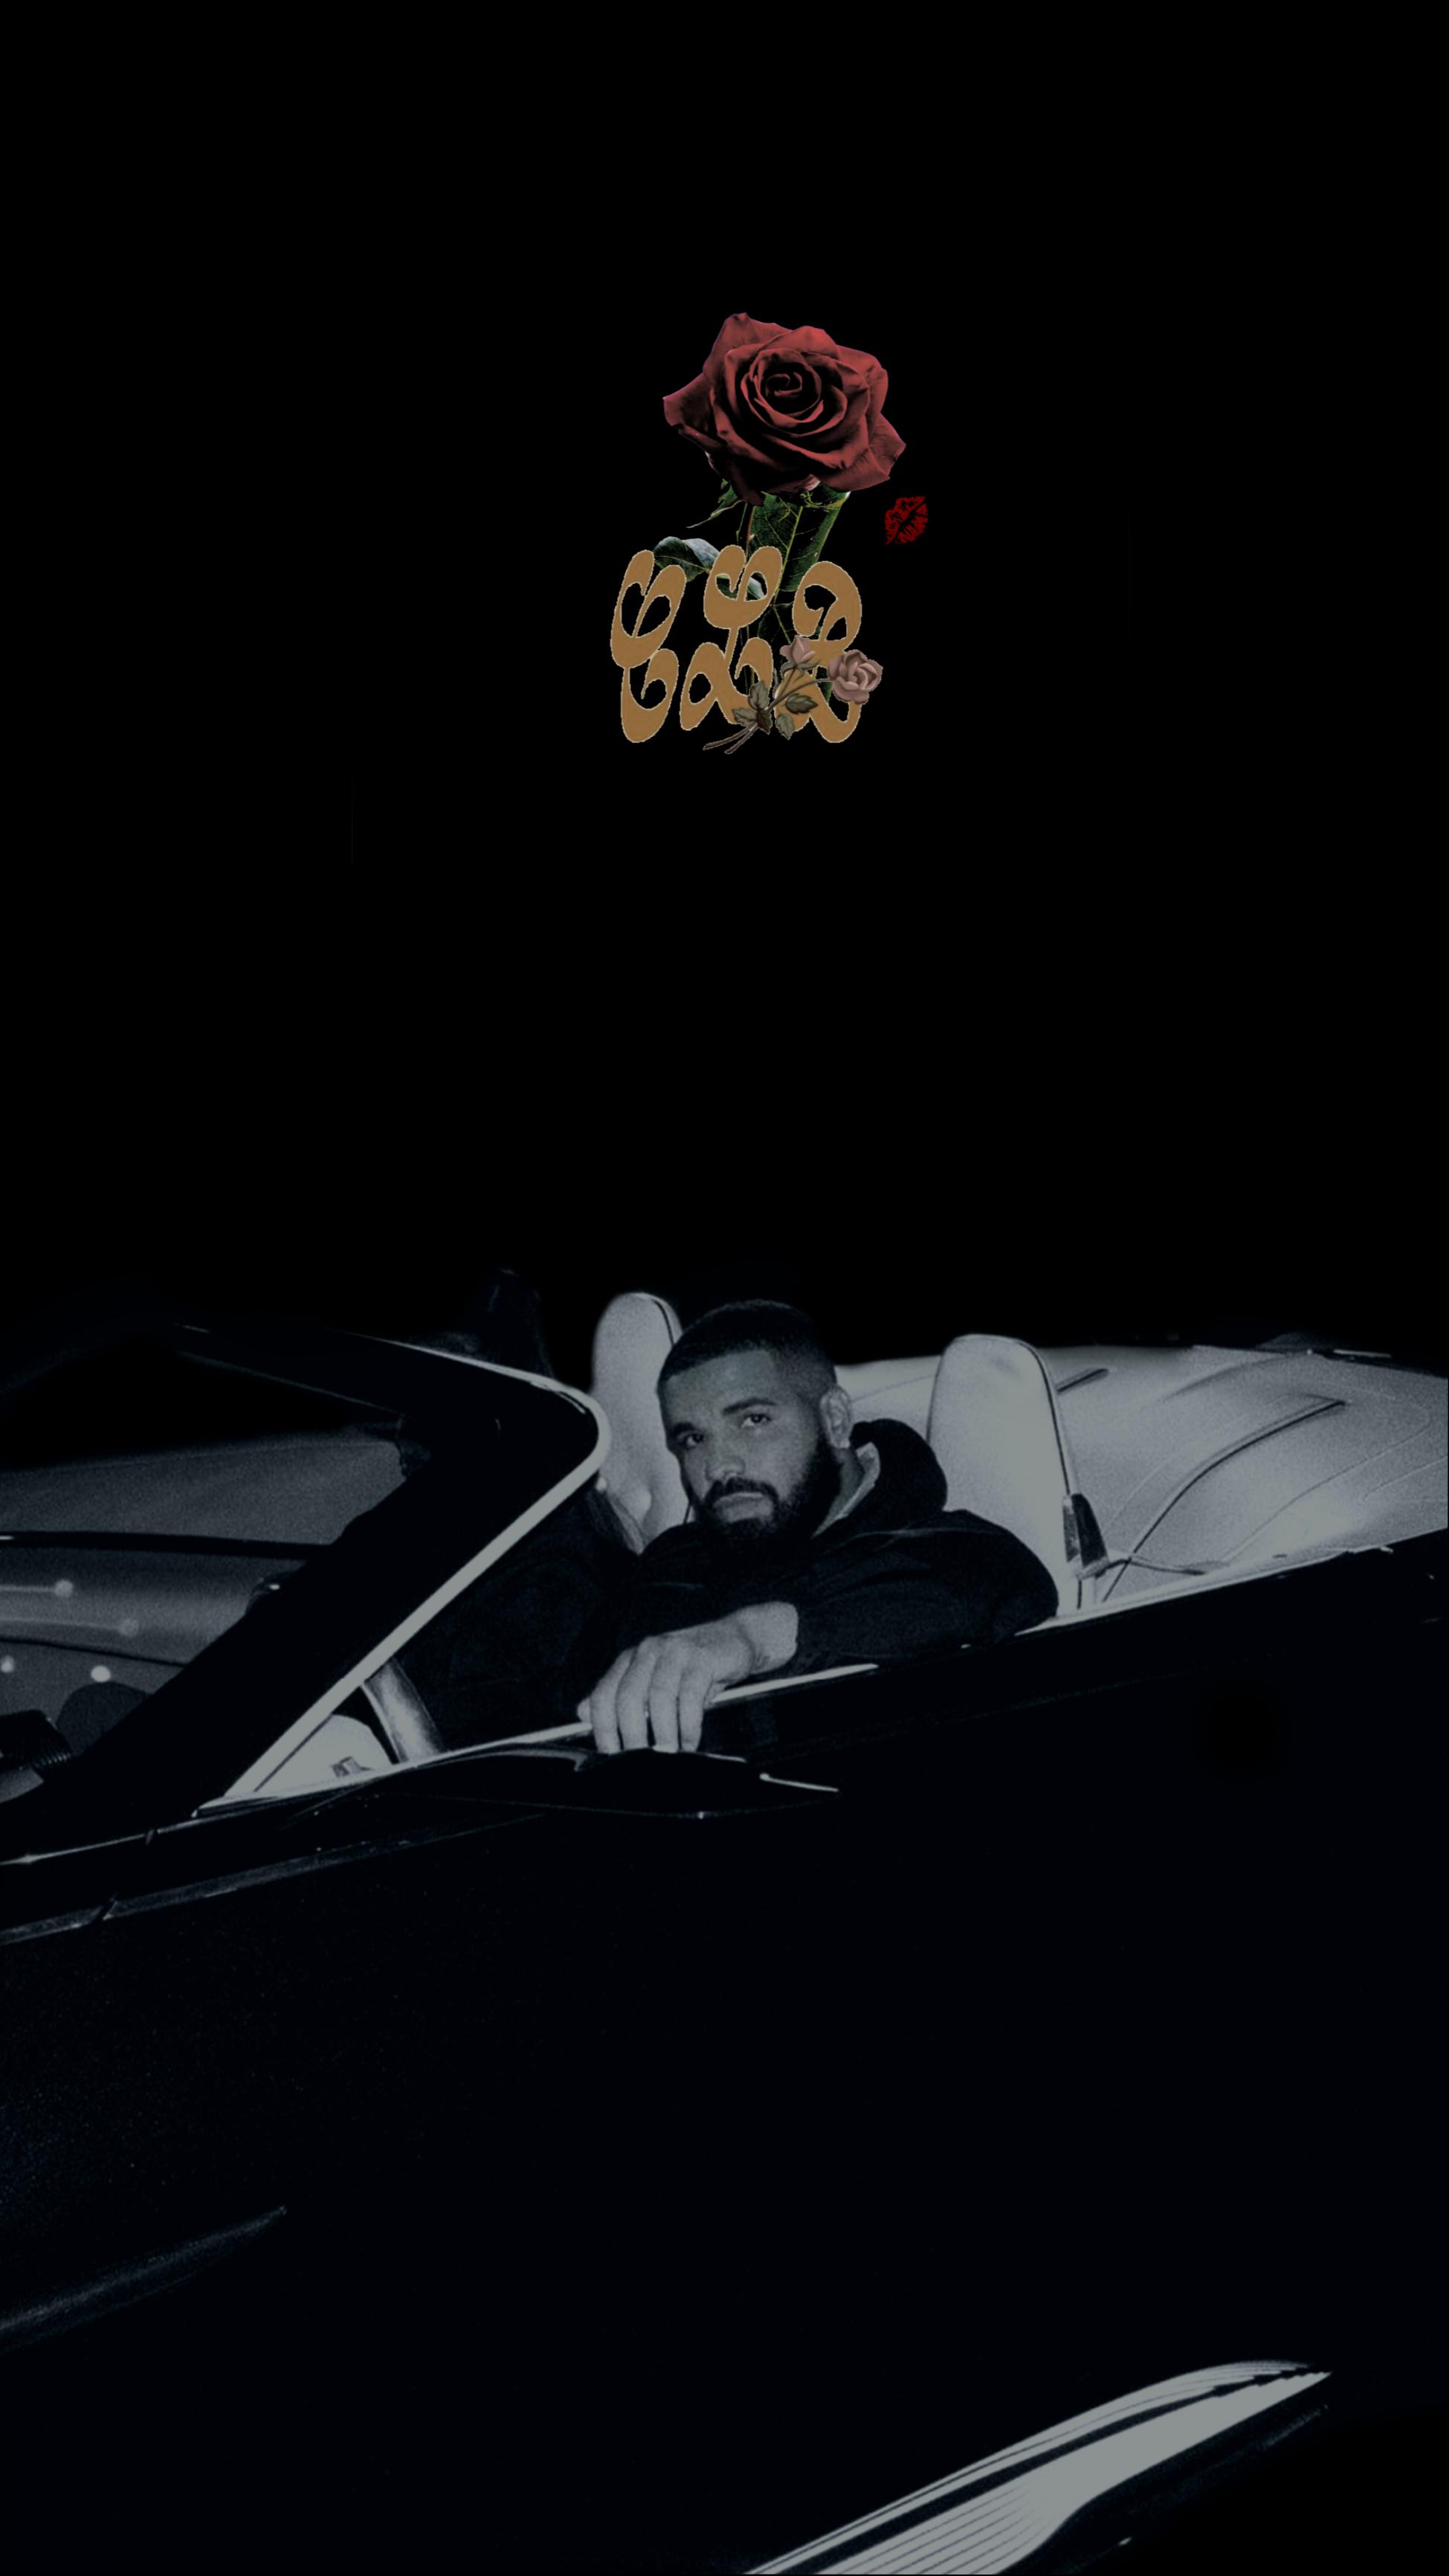 Remake of CLB cover by me (Drake Wallpaper)